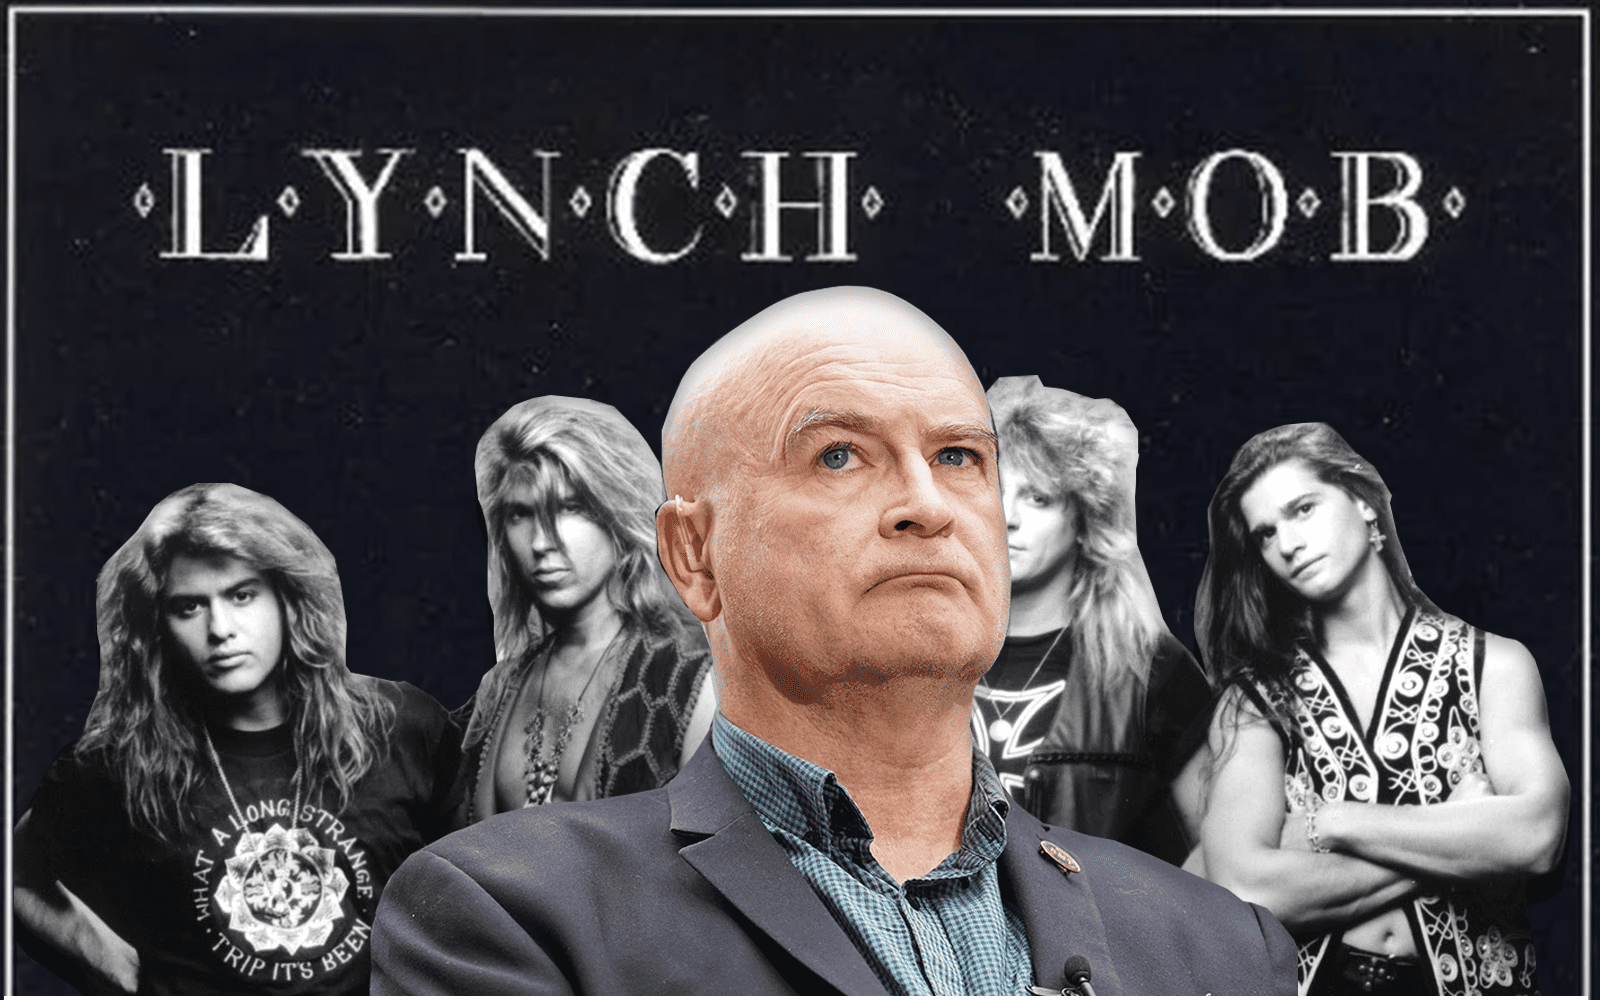 Lynch Mob: The best of Mick